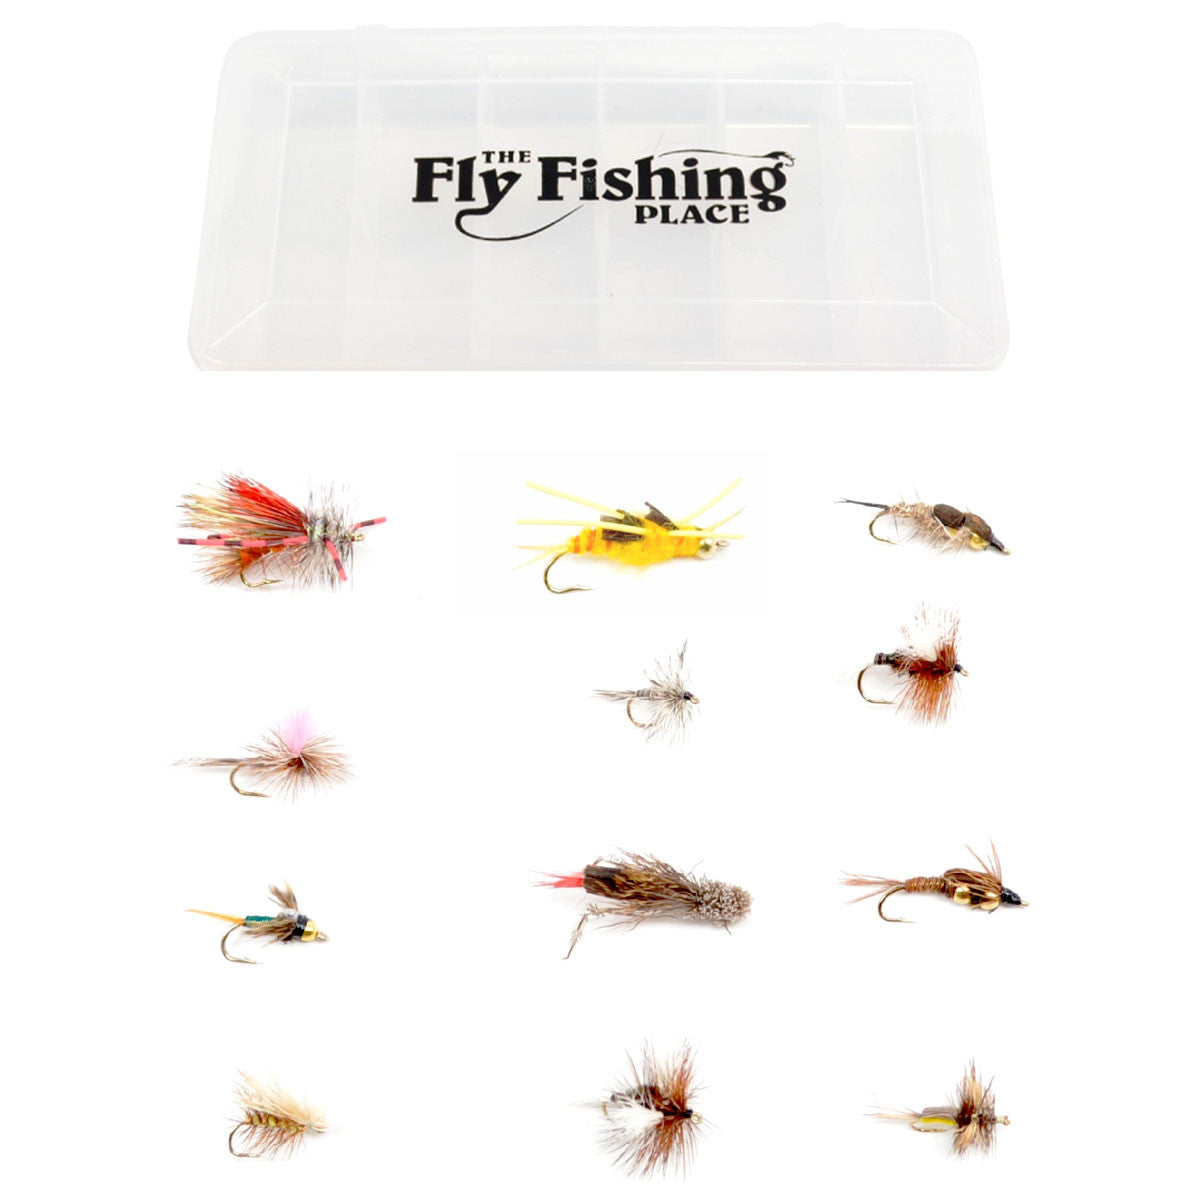 Fly Fishing Flies | 16pc Fly Fishing Flies Assortment | Trout Flies |  Streamer Flies and Dry Flies Fly Fishing Lures